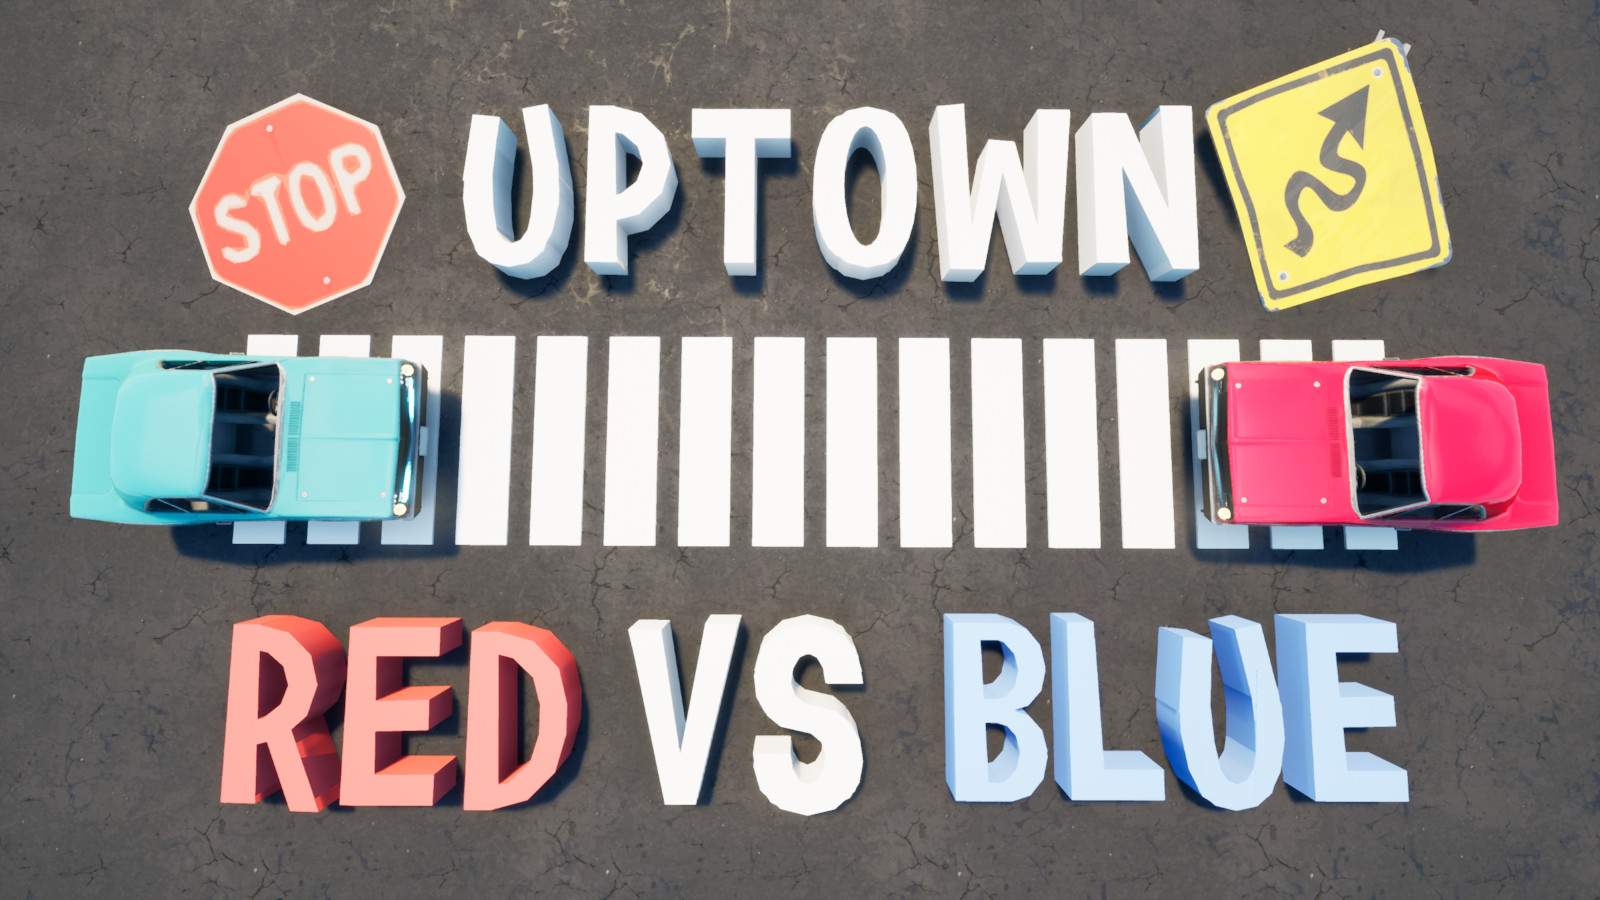 UPTOWN RED VS. BLUE